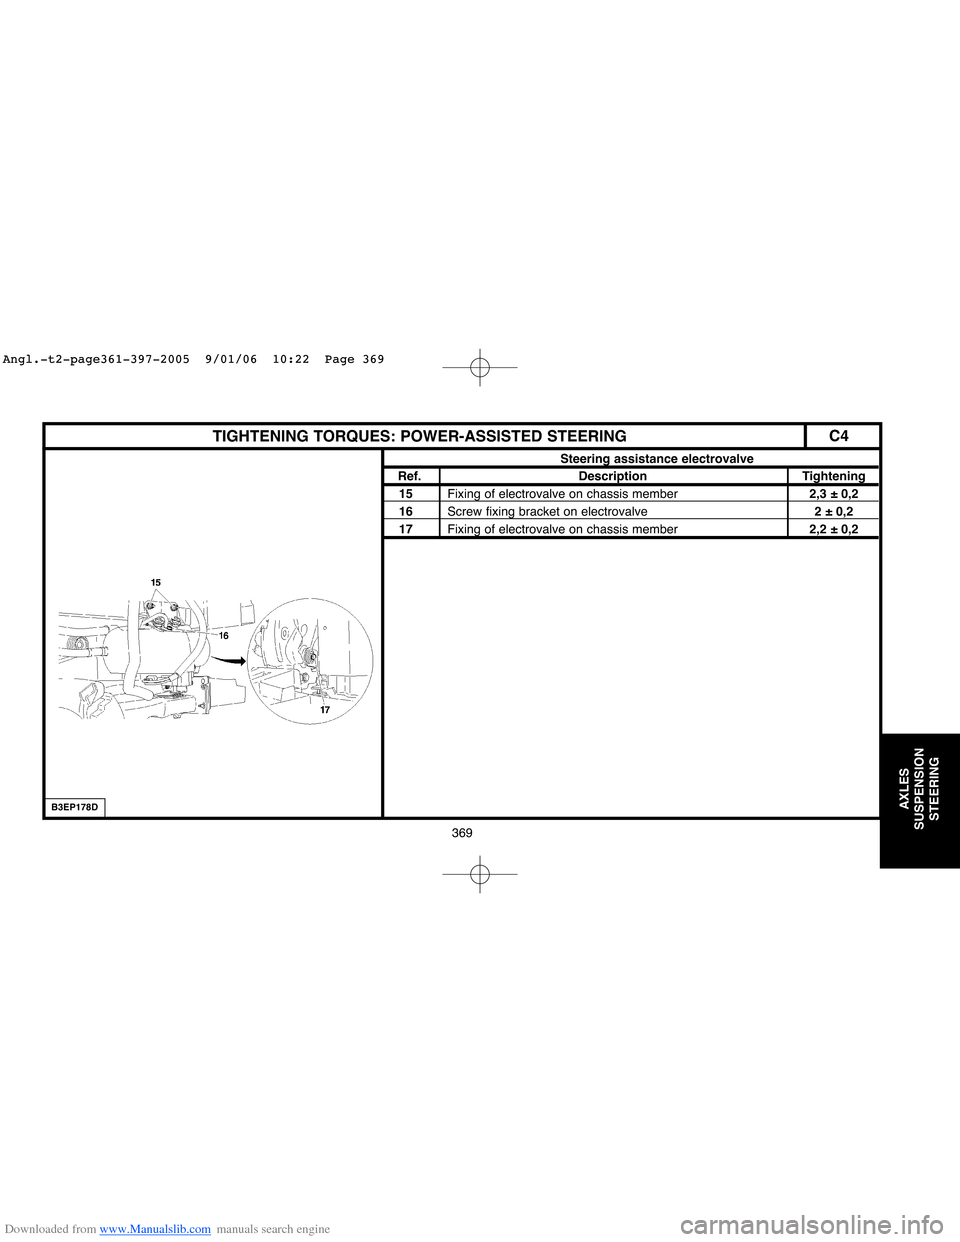 Citroen C4 2005 2.G User Guide Downloaded from www.Manualslib.com manuals search engine 369
AXLES
SUSPENSION
STEERING
C4TIGHTENING TORQUES: POWER-ASSISTED STEERING
Steering assistance electrovalve
Ref. Description Tightening
15Fixi